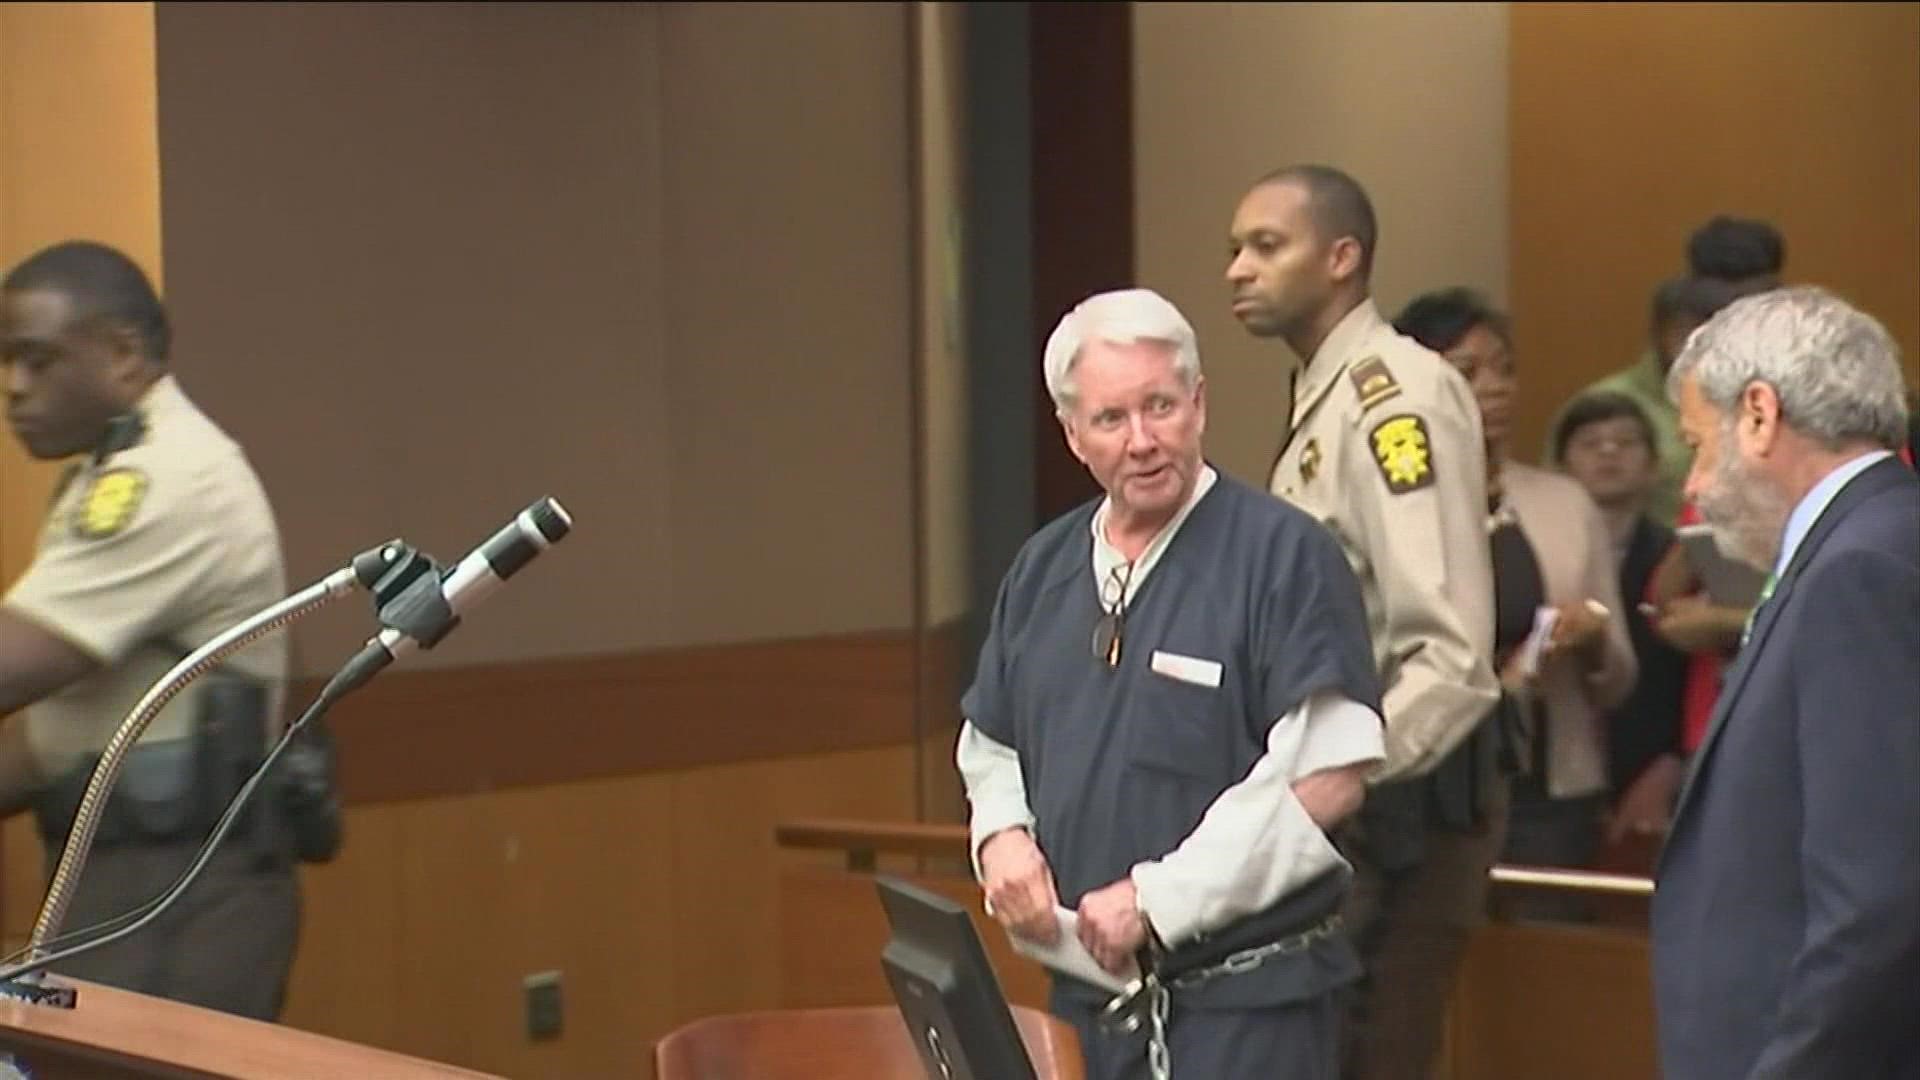 A life sentence appeal is happening Wednesday for Tex McIver.